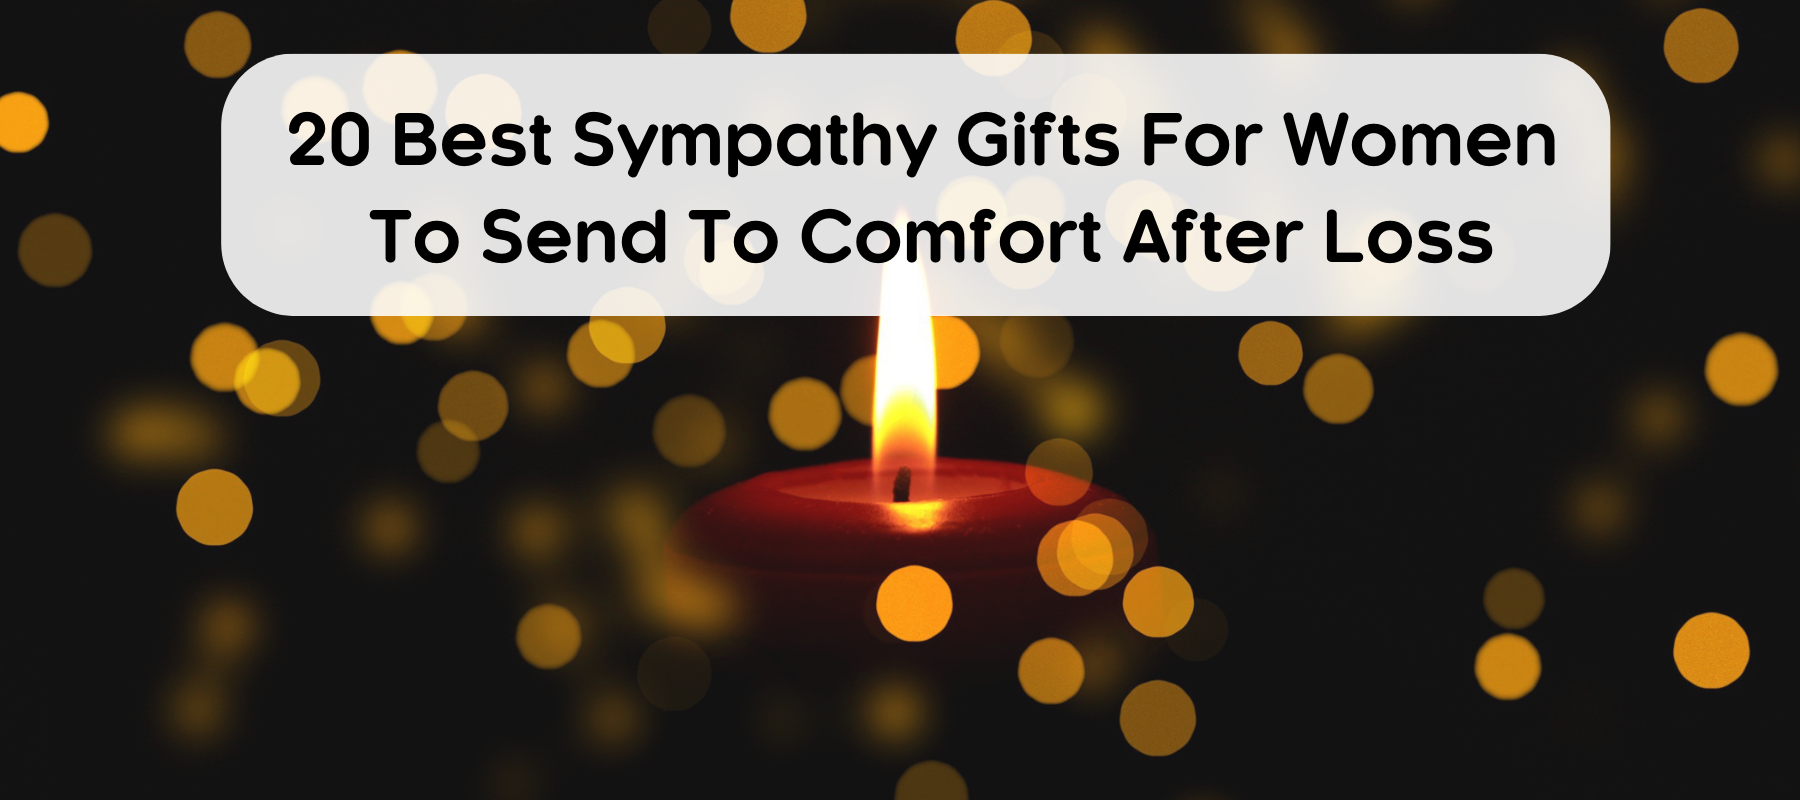 20 Best Sympathy Gifts For Women To Send To Comfort After Loss